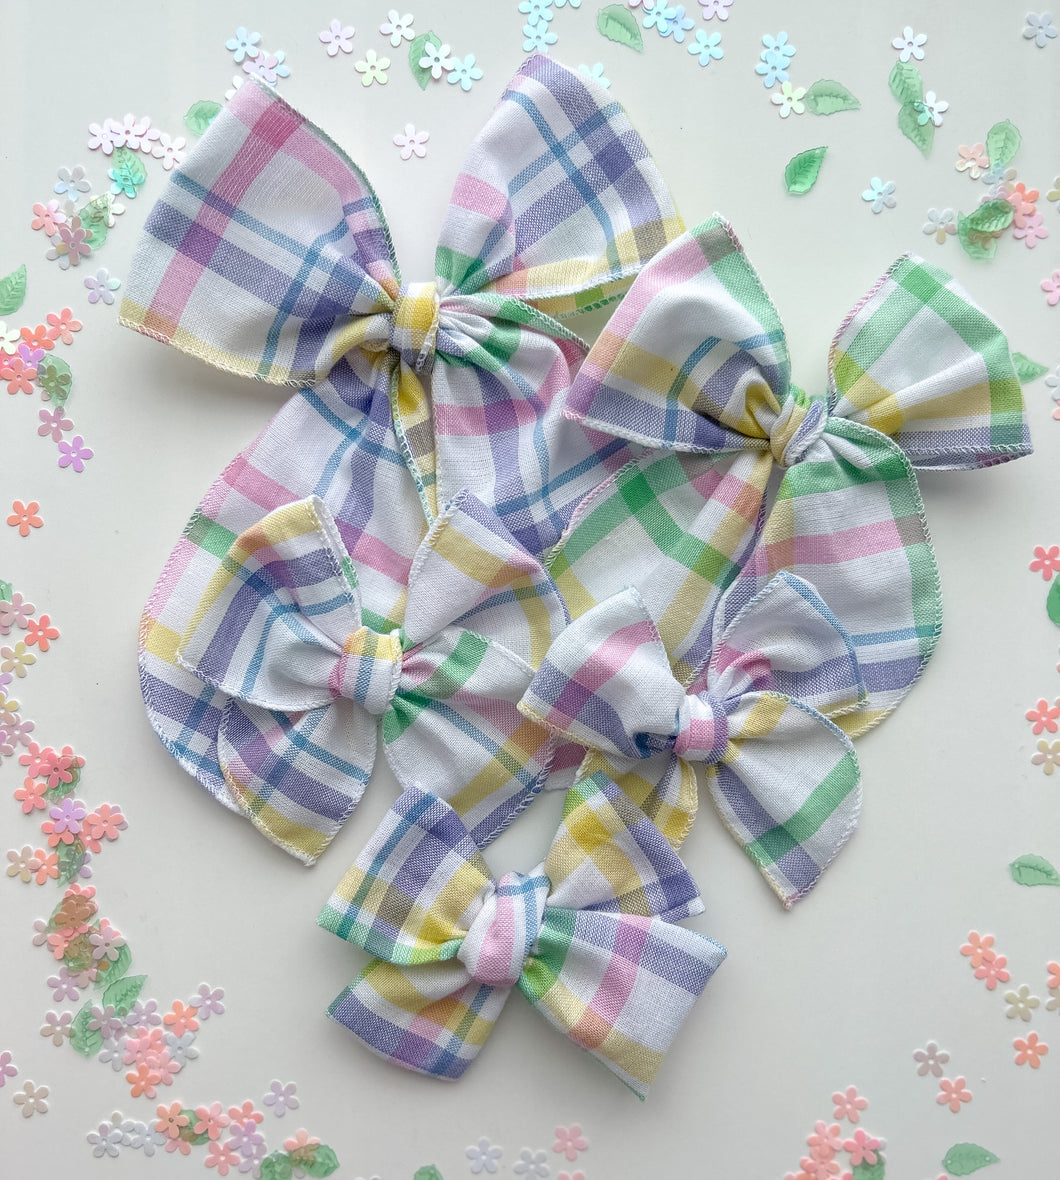 The Easter Plaid Bow